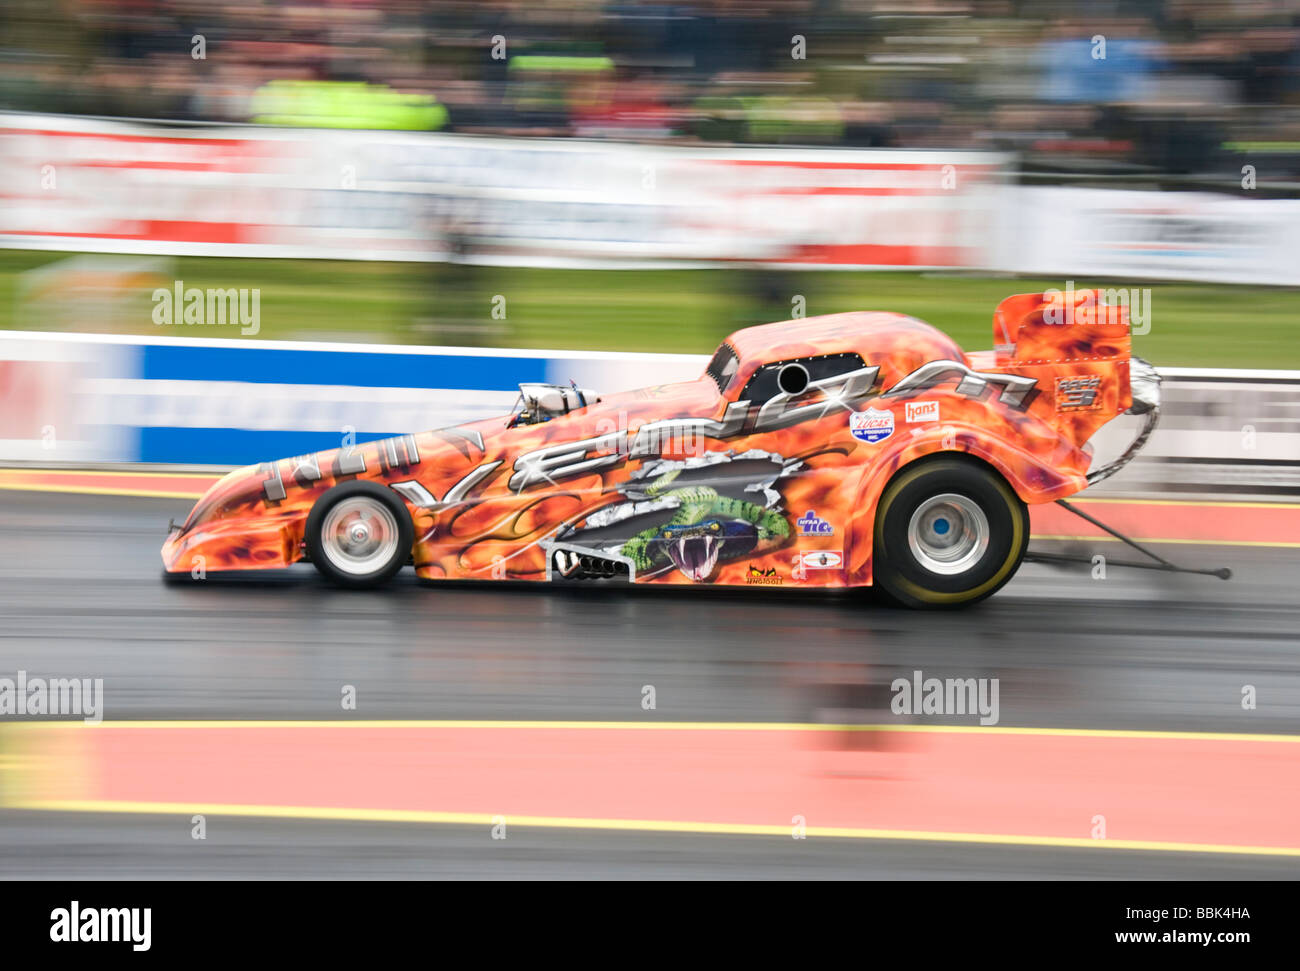 Top Fuel dragster Venom driven by Tony Betts at the Easter Thunderball event in Santa Pod, England Stock Photo